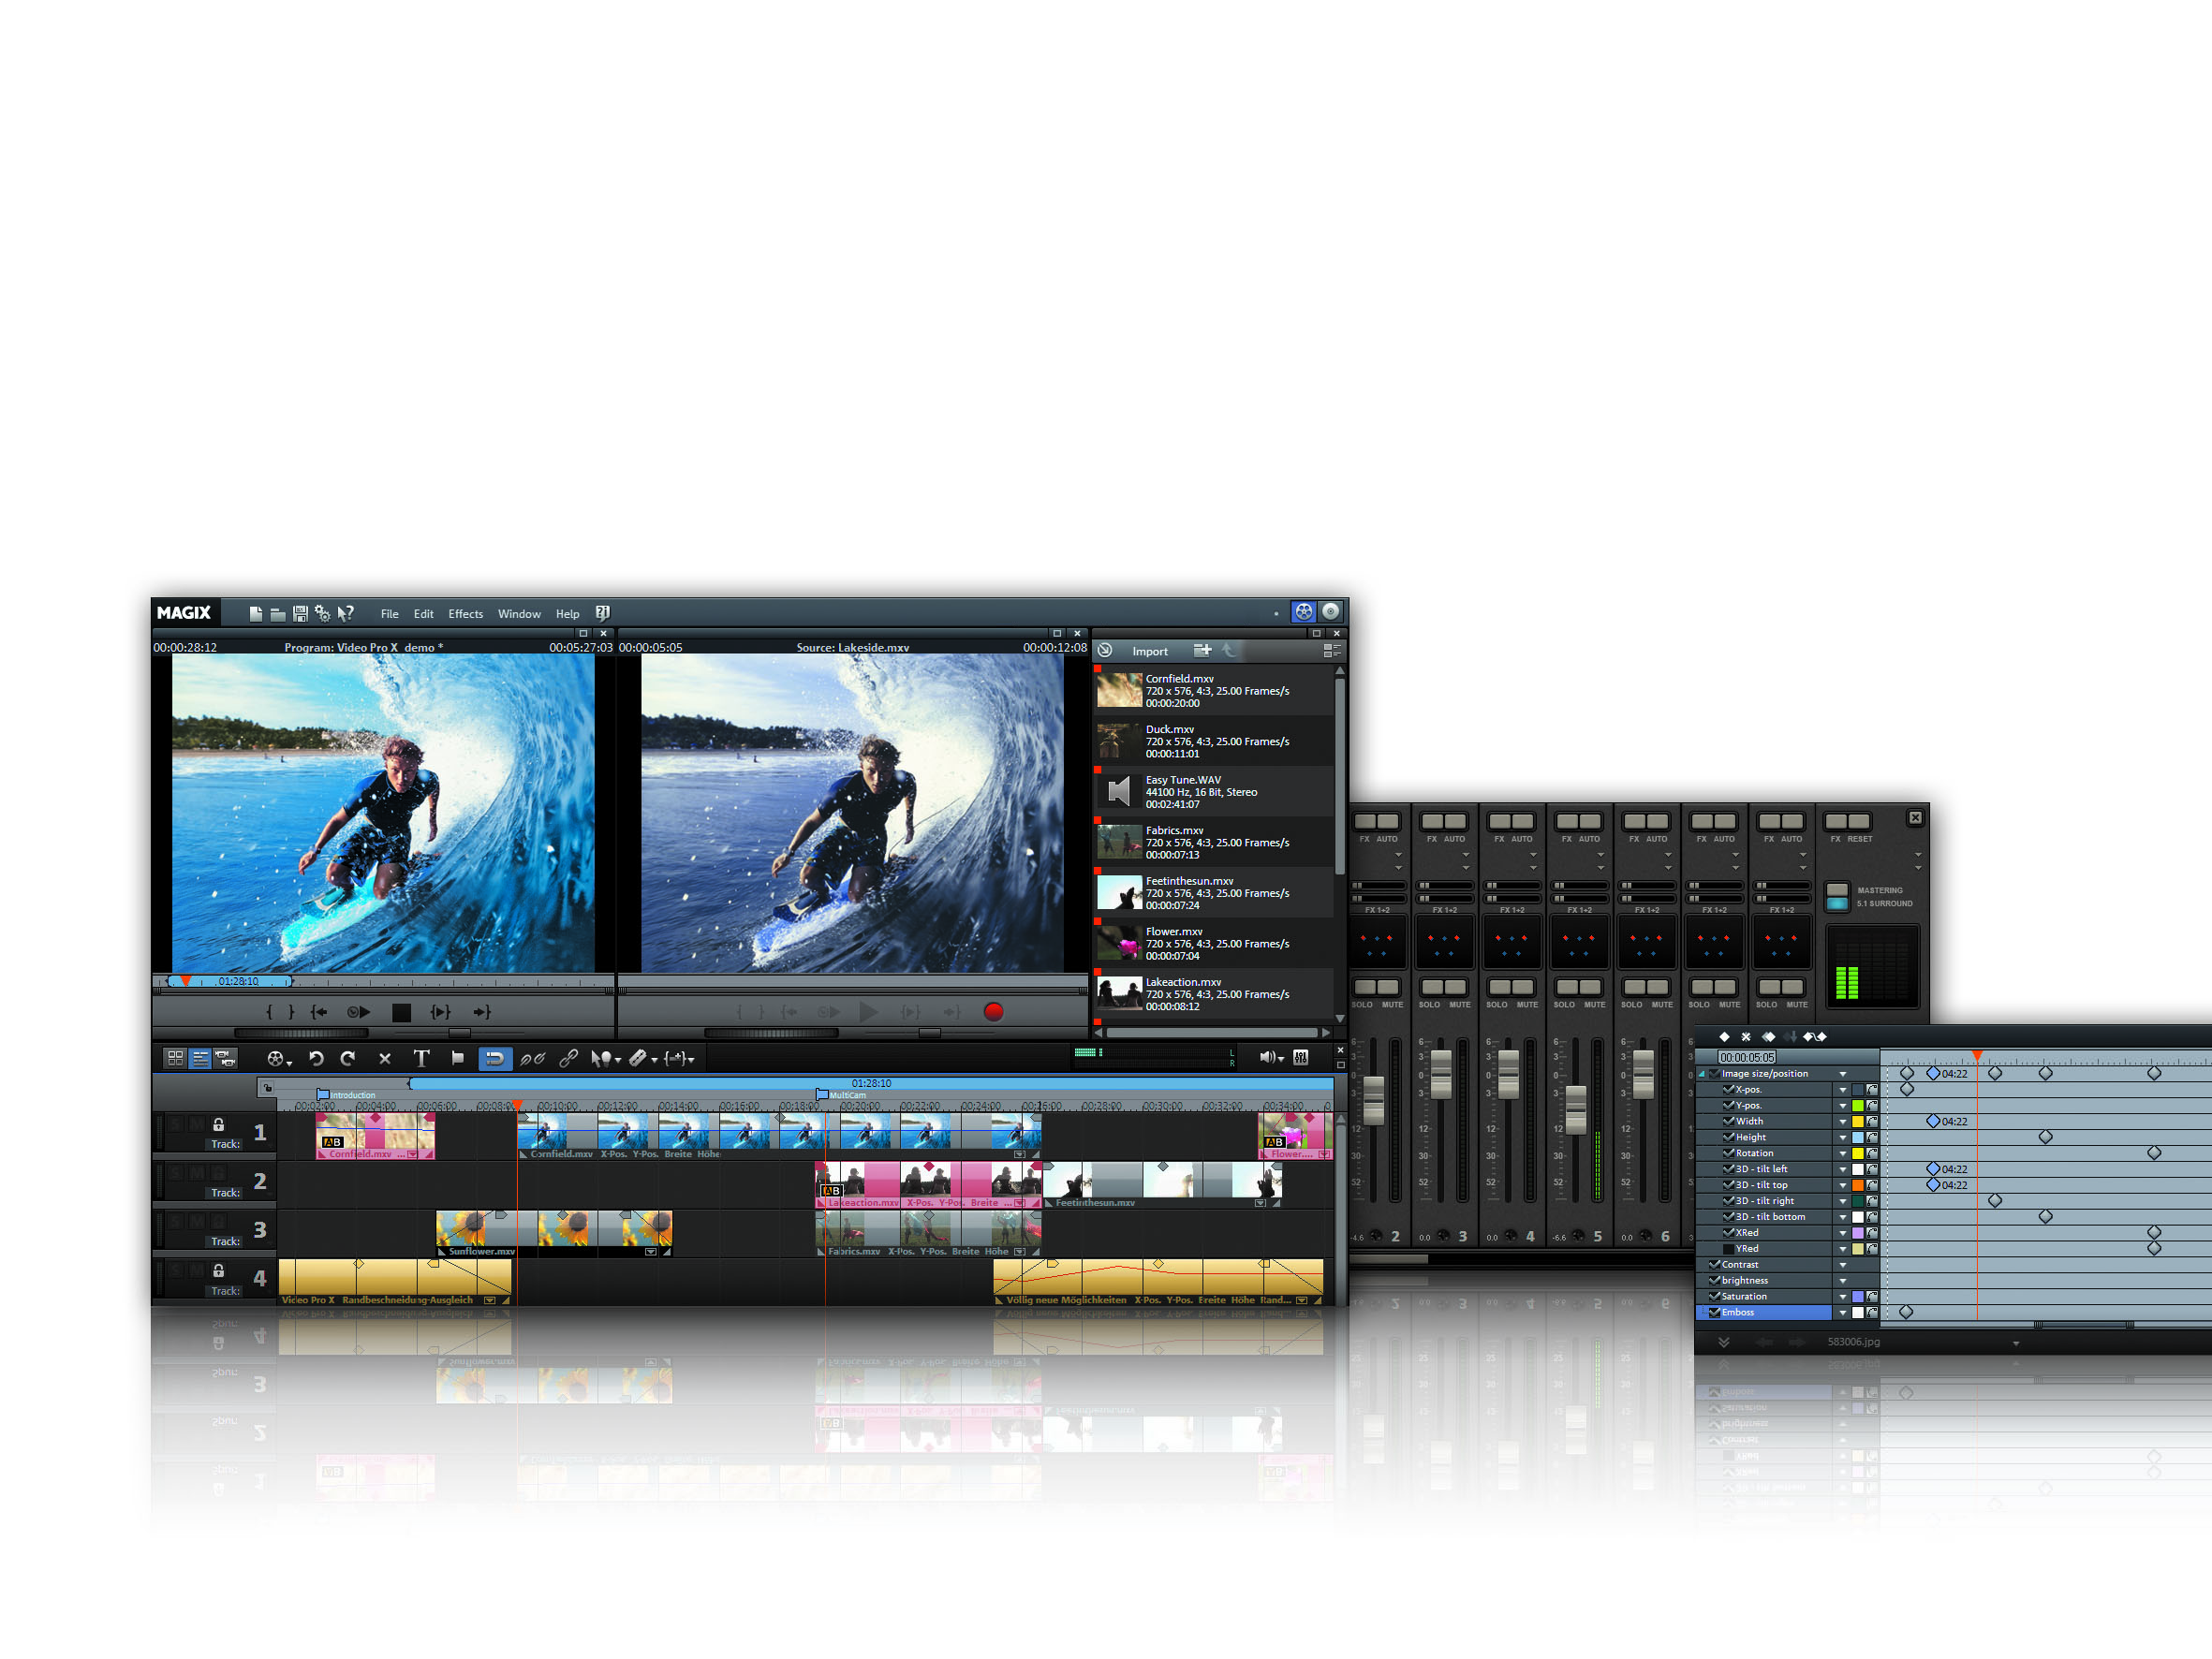 download the last version for apple MAGIX Video Pro X15 v21.0.1.193